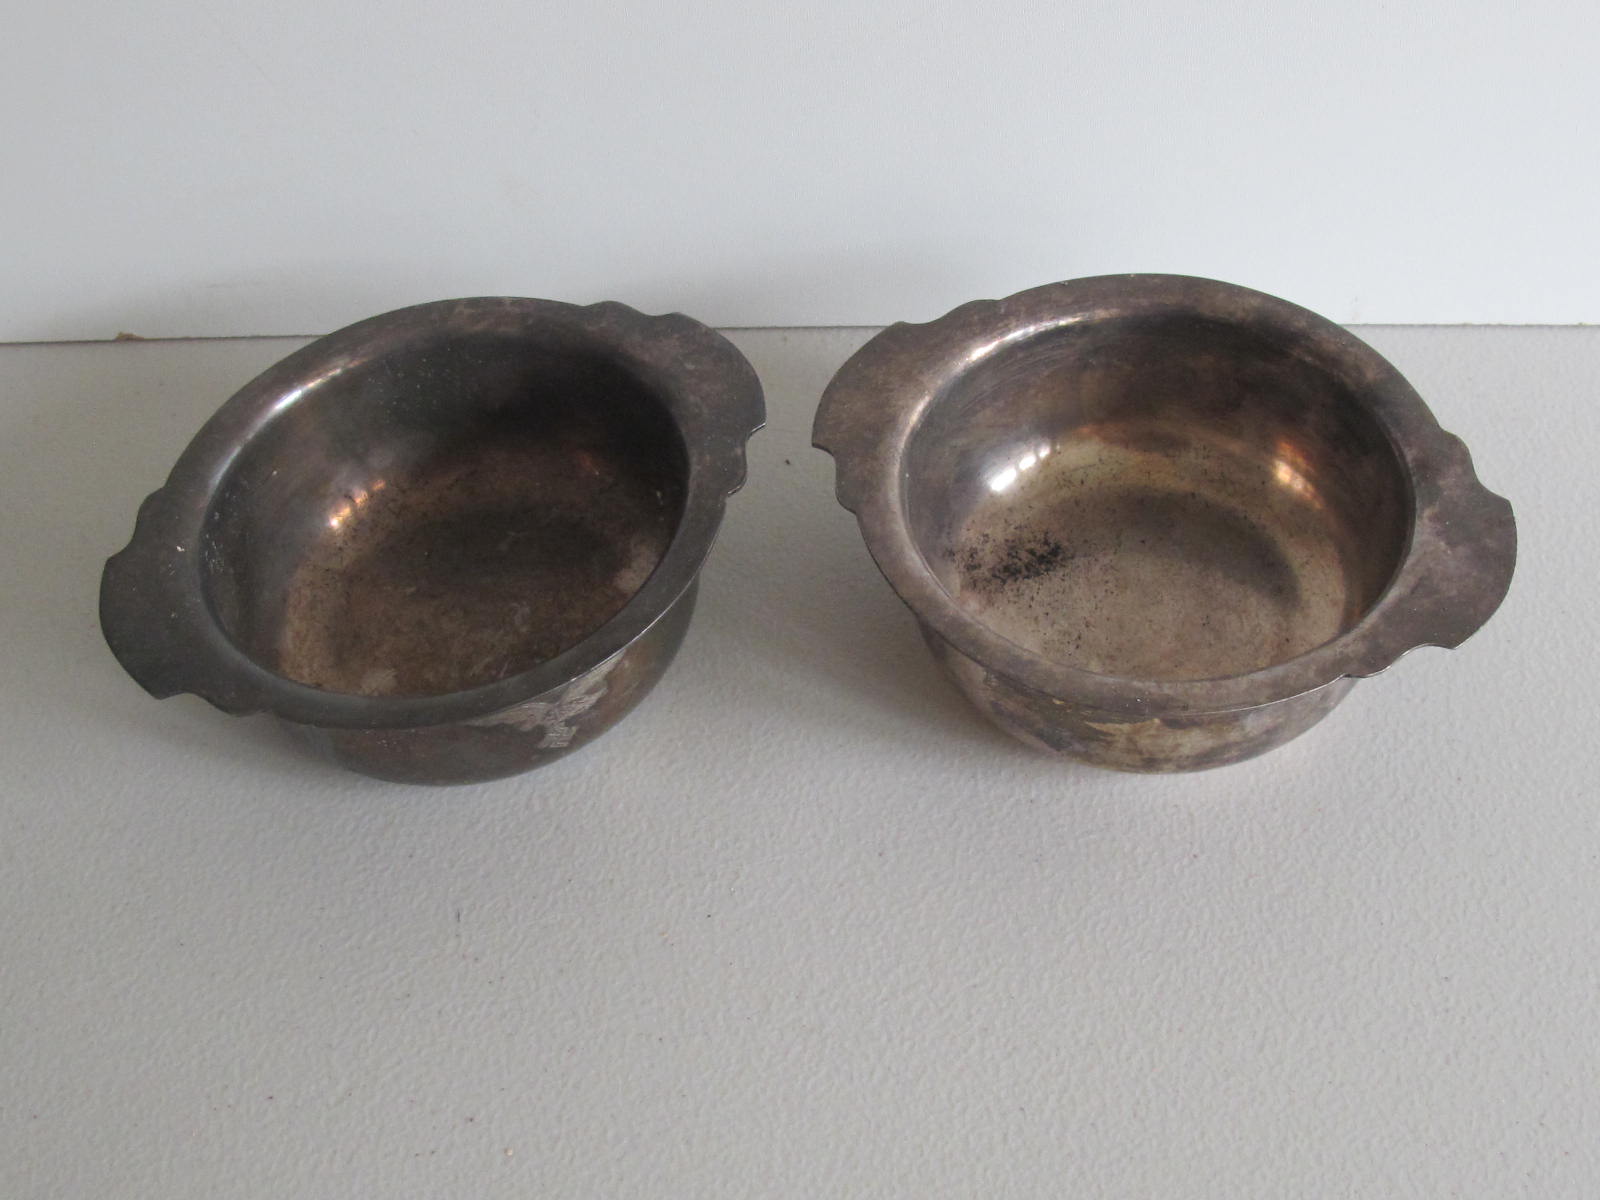 Third Reich Luftwaffe Silver Plated Bowls – Item 97275 | Military Antiques